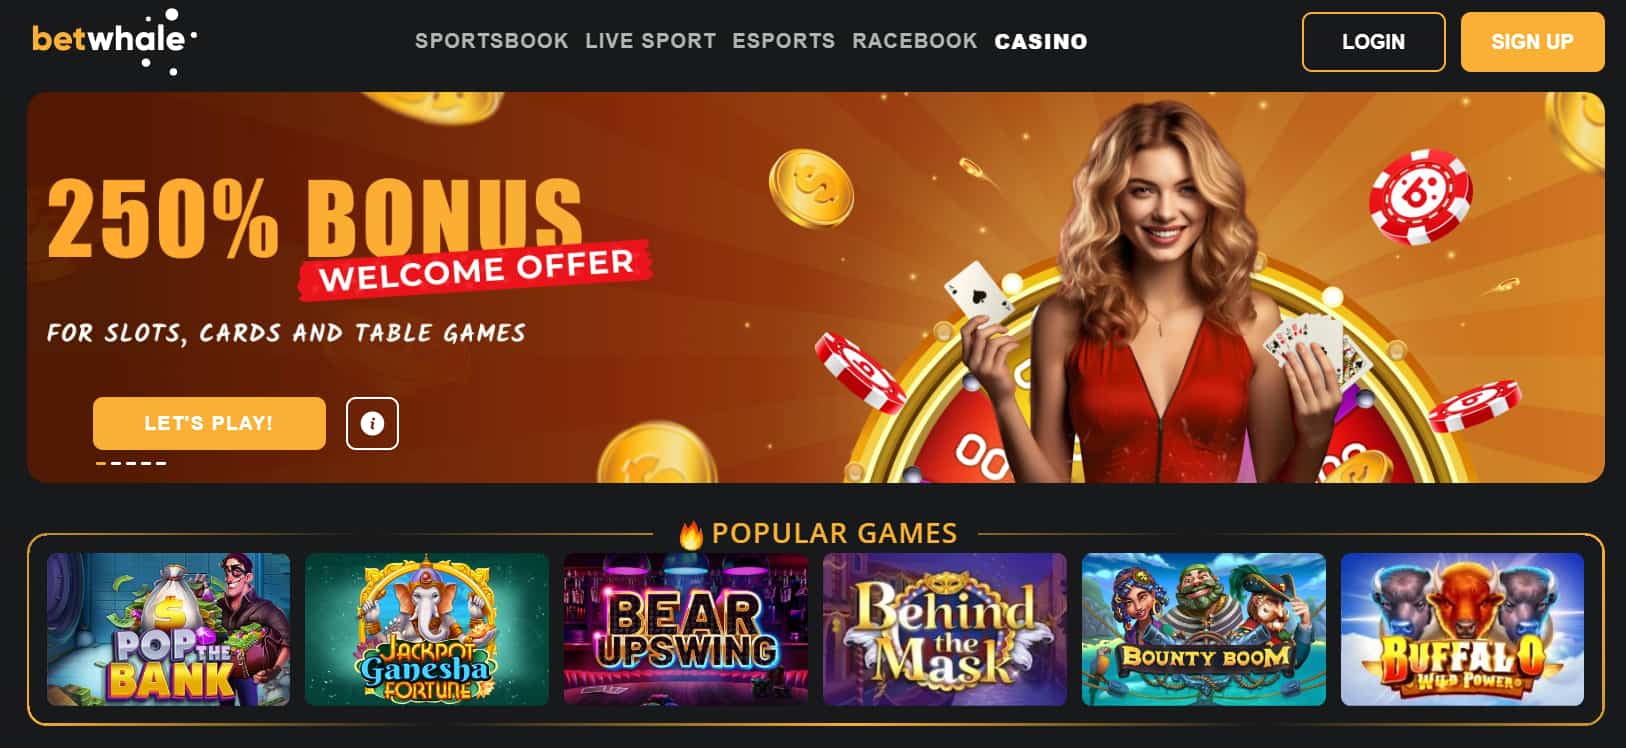 gambling partners betwhale casino welcome bonus offer